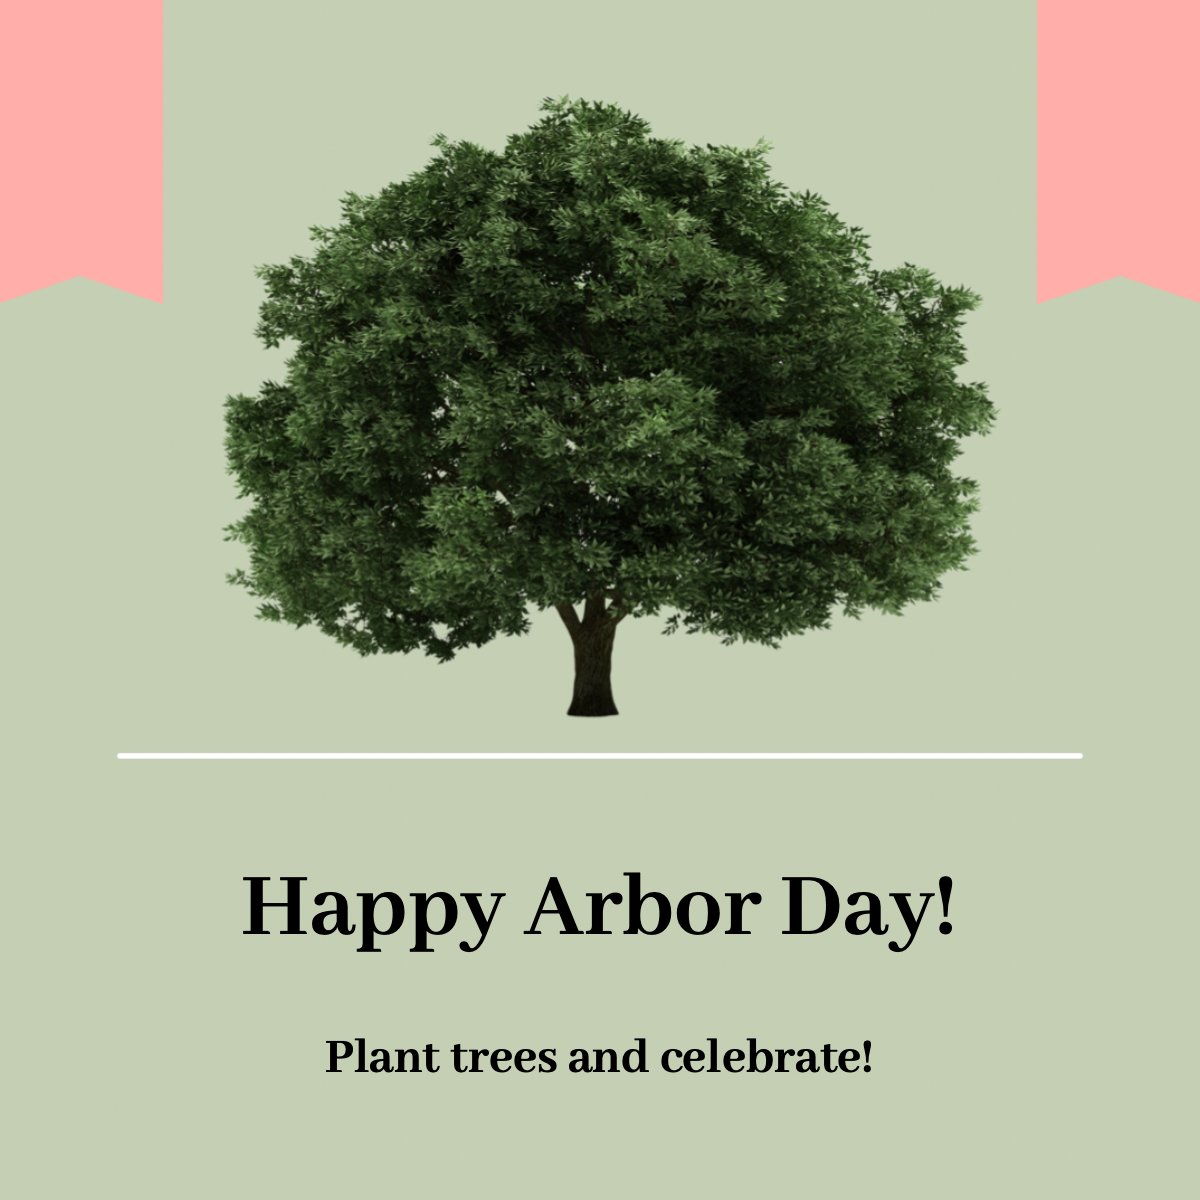 'There's nothing wrong with having a tree as a friend.' – Bob Ross

Happy Arbor Day 🌲!

#arborday #trees #dayforthetrees #blue #white #black #sunset
 #SchuylerRealty #KellerWilliamsRealty #GroveCityRealEstate #KellerWilliamsConsultants #MarineCorpsVeteran